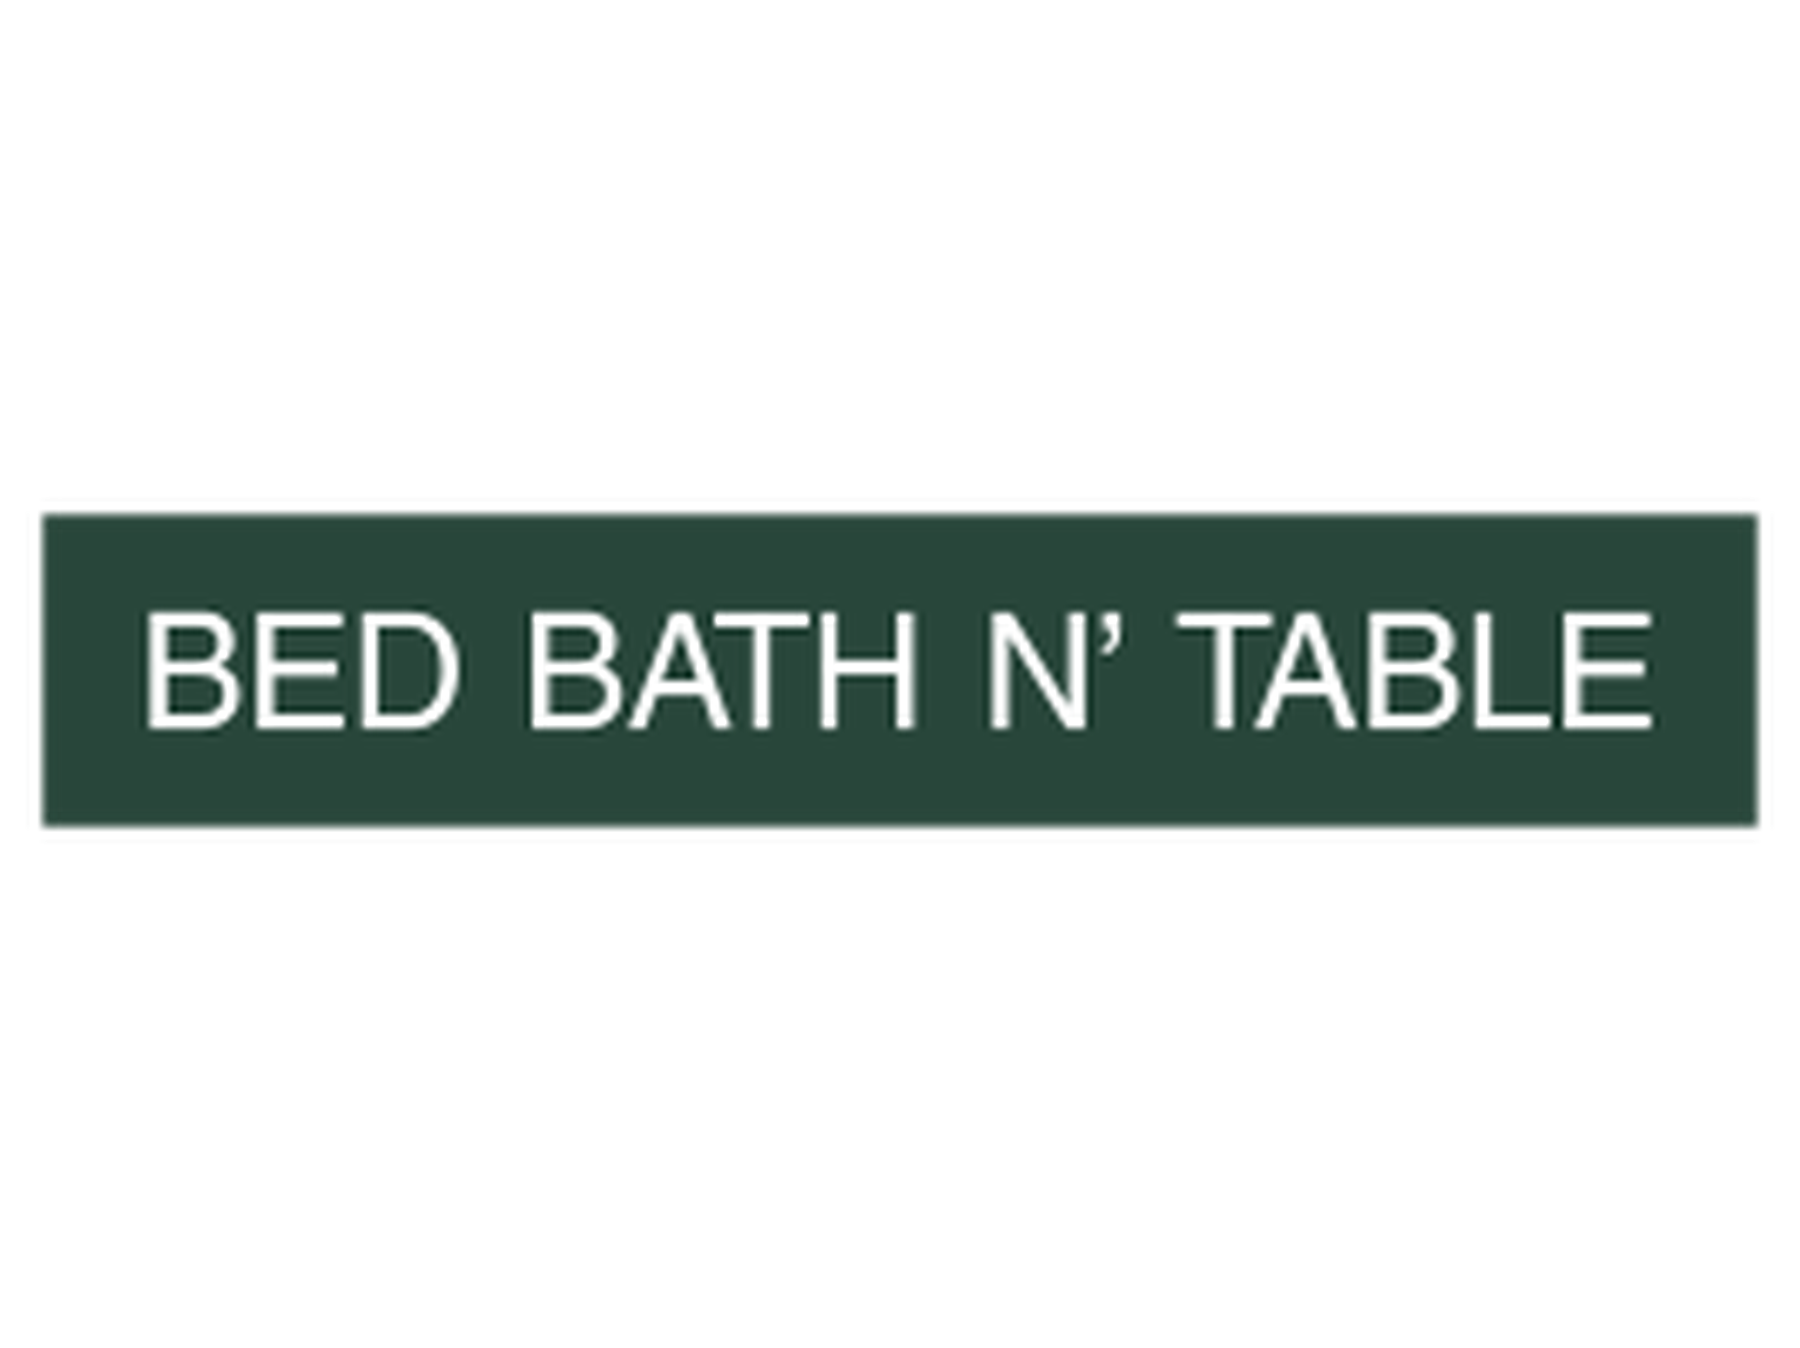 Bed Bath and Table Discount Code